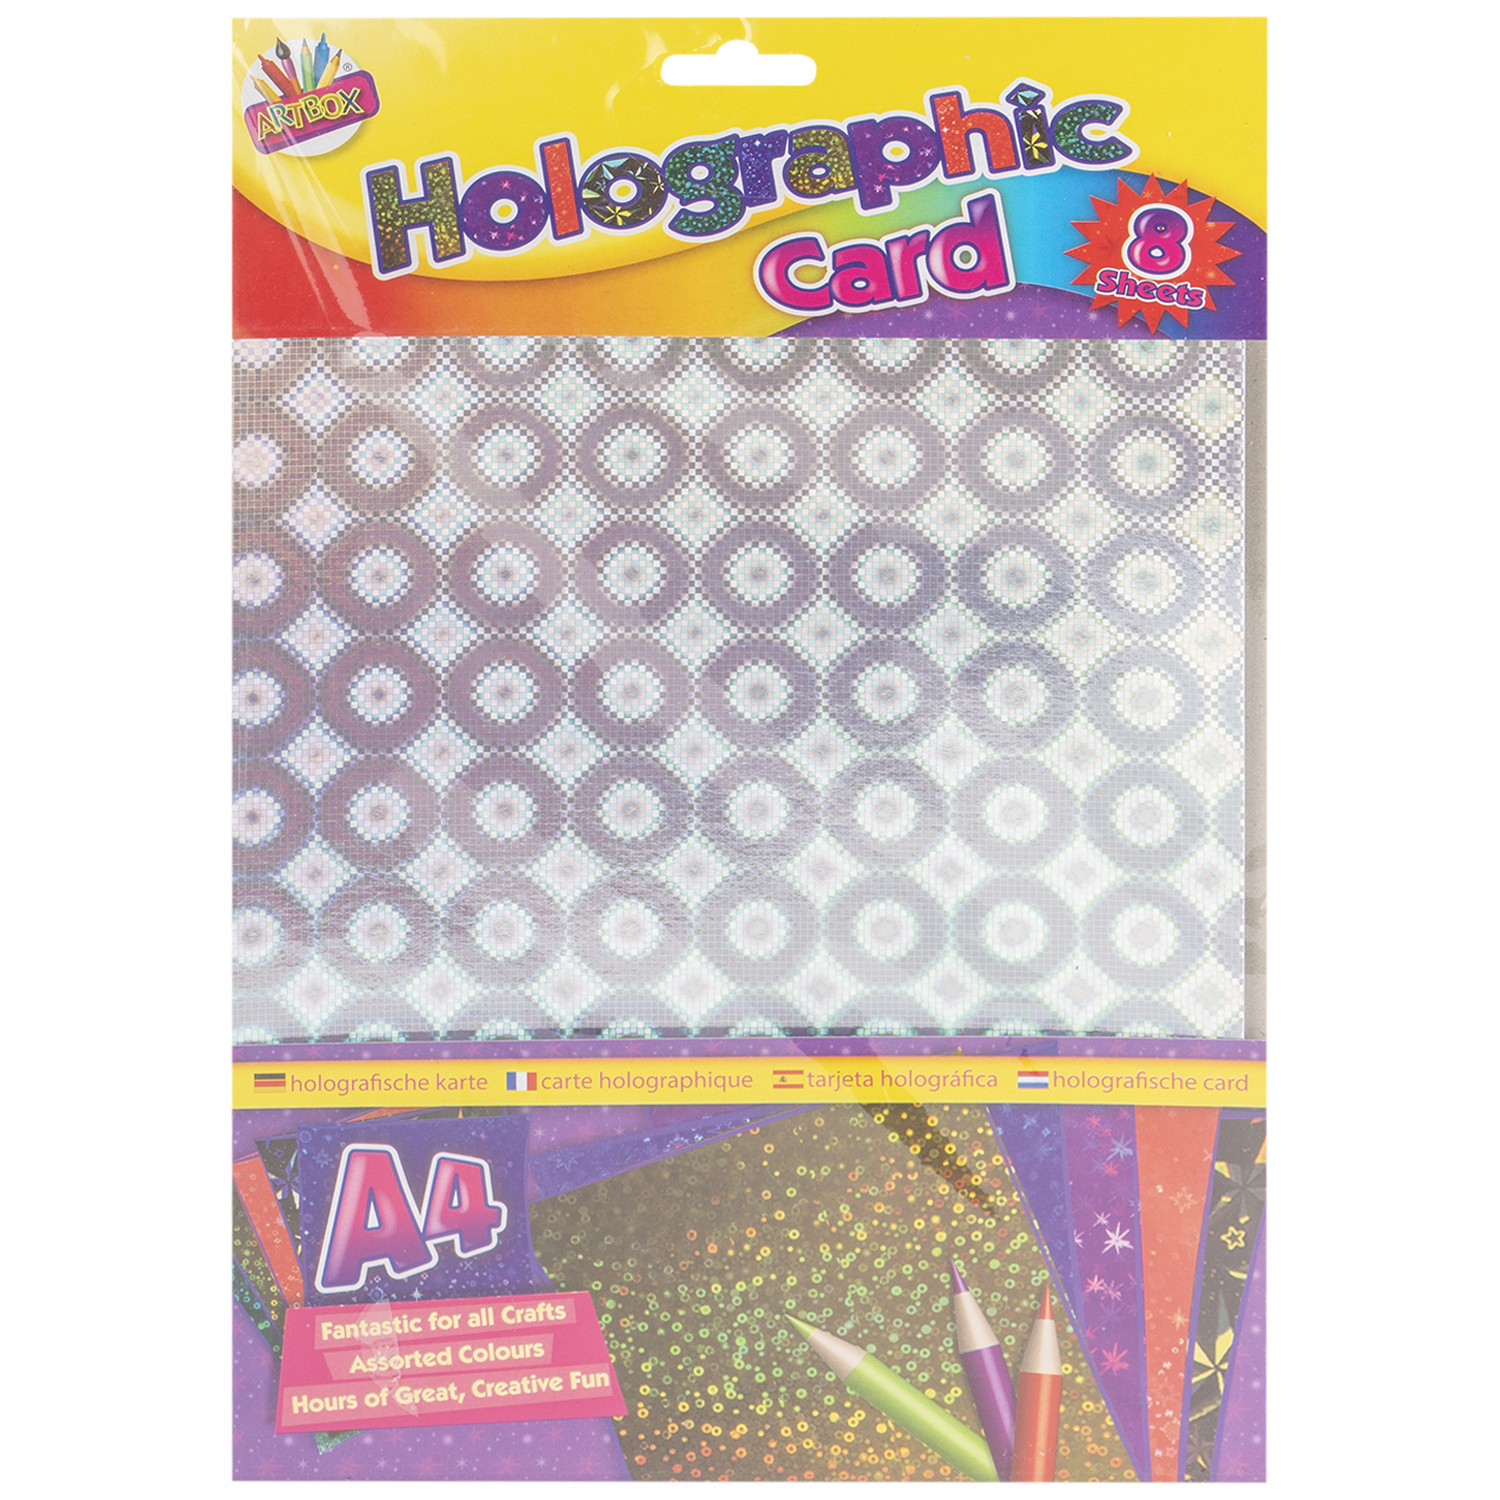 Pack of 8 Artbox Holographic Card Image 5